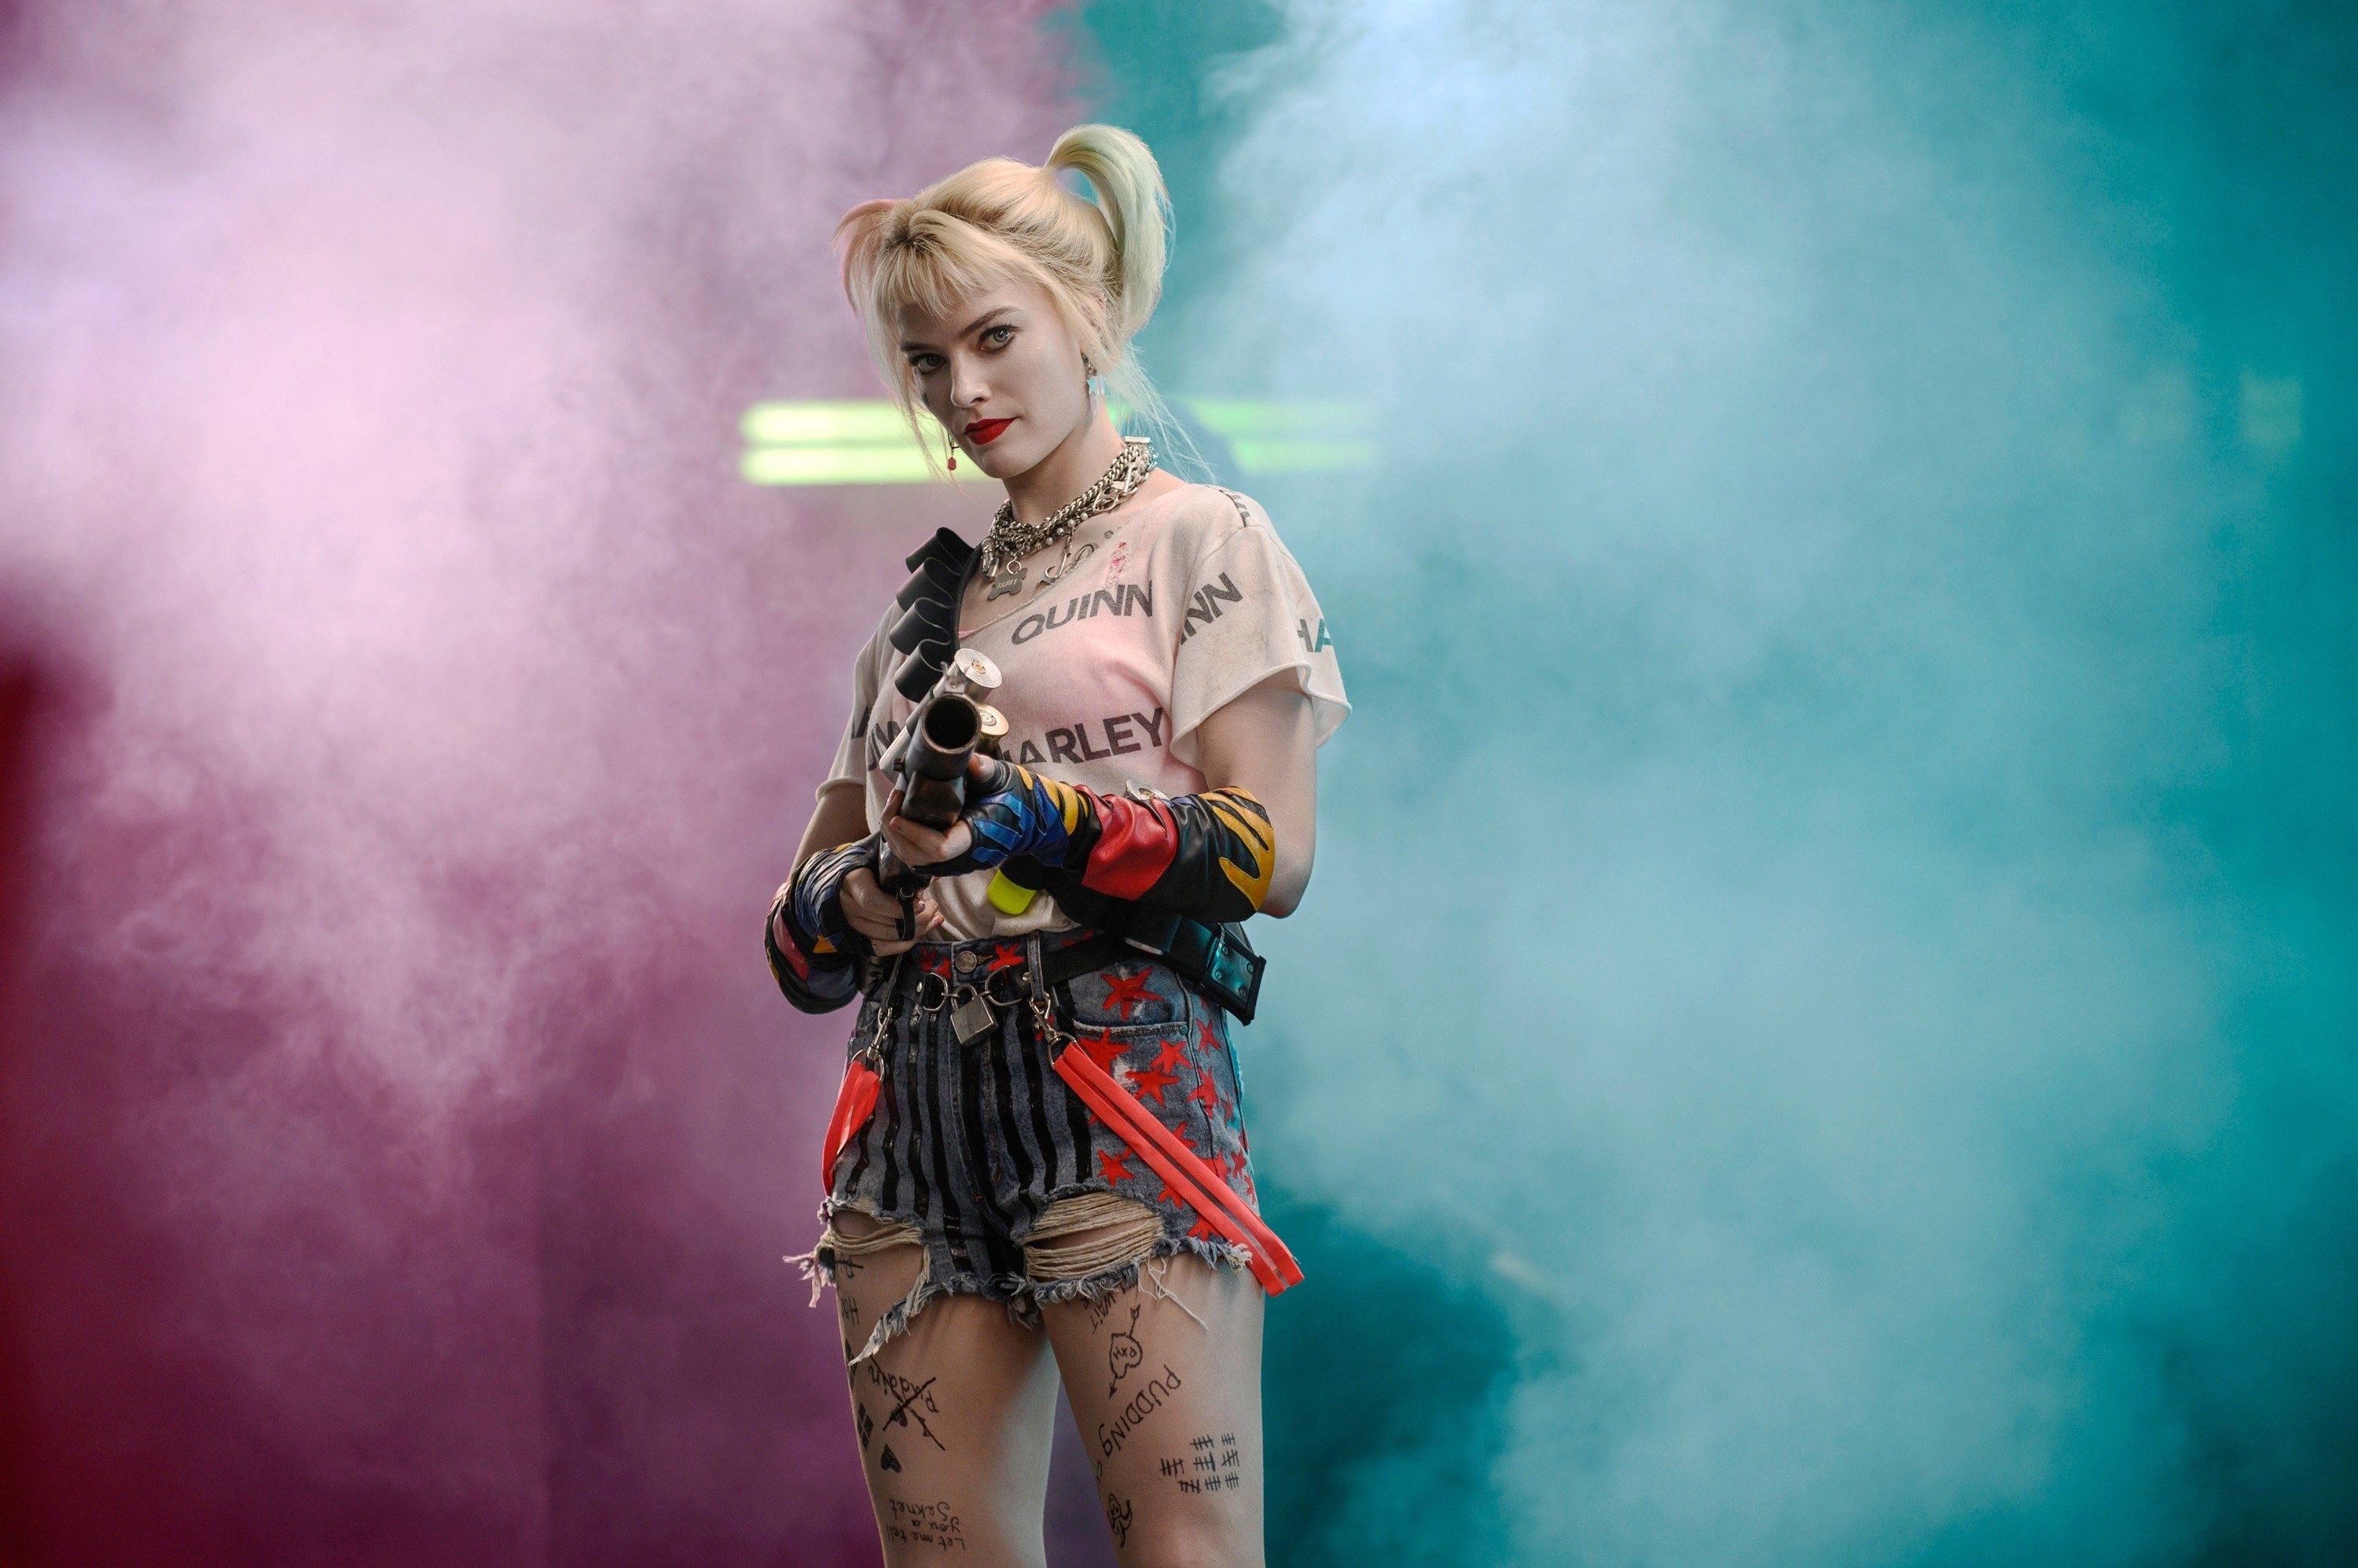 Harley in a t-shirt that says &quot;harley quinn&quot; with american flag jean shorts and suspenders falling down from the belt, as well as the same dog collars and necklaces from the last outfit